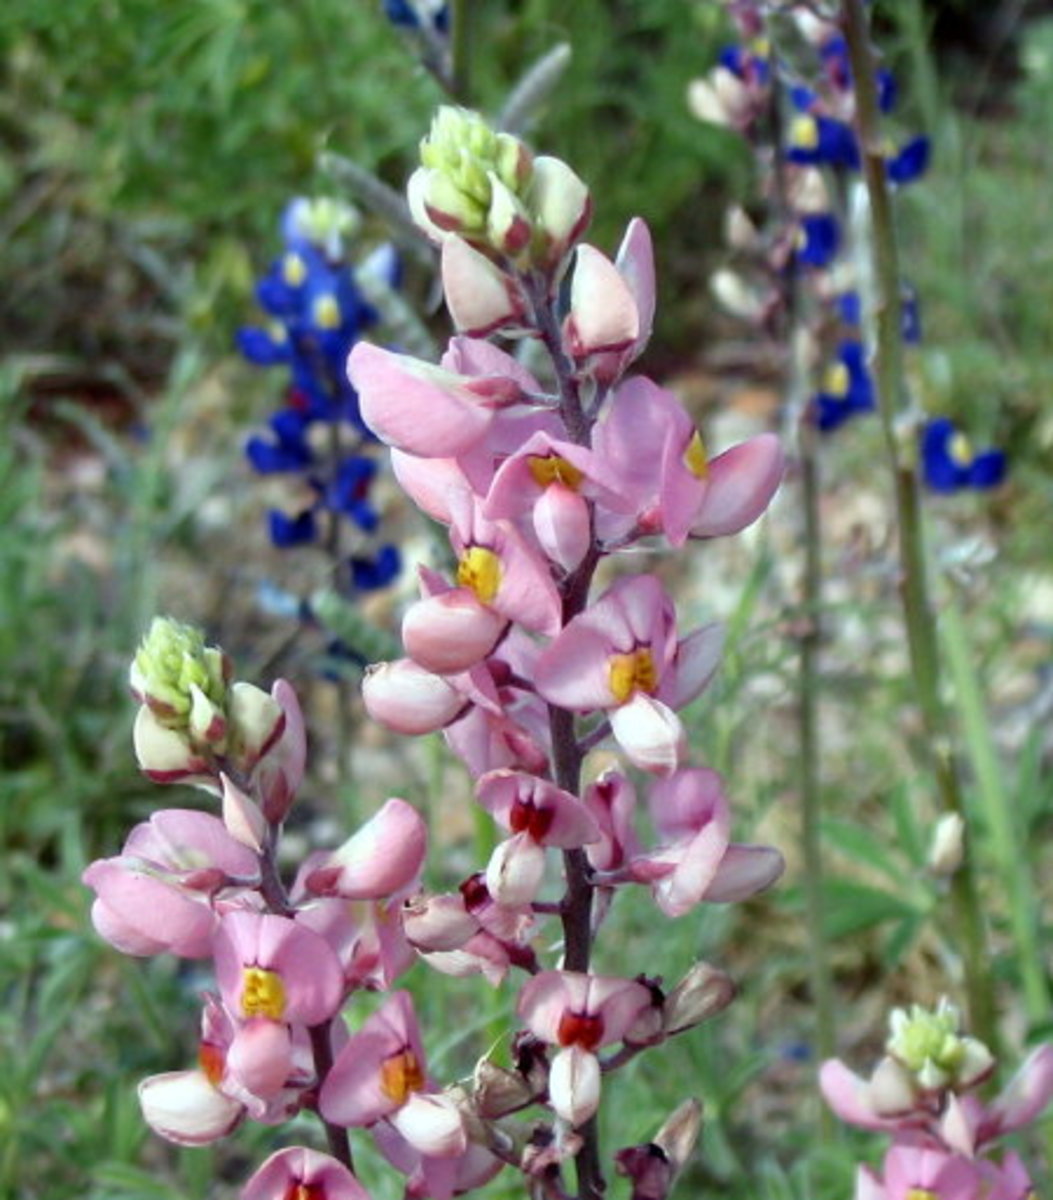 The Legend of the Pink Bluebonnets